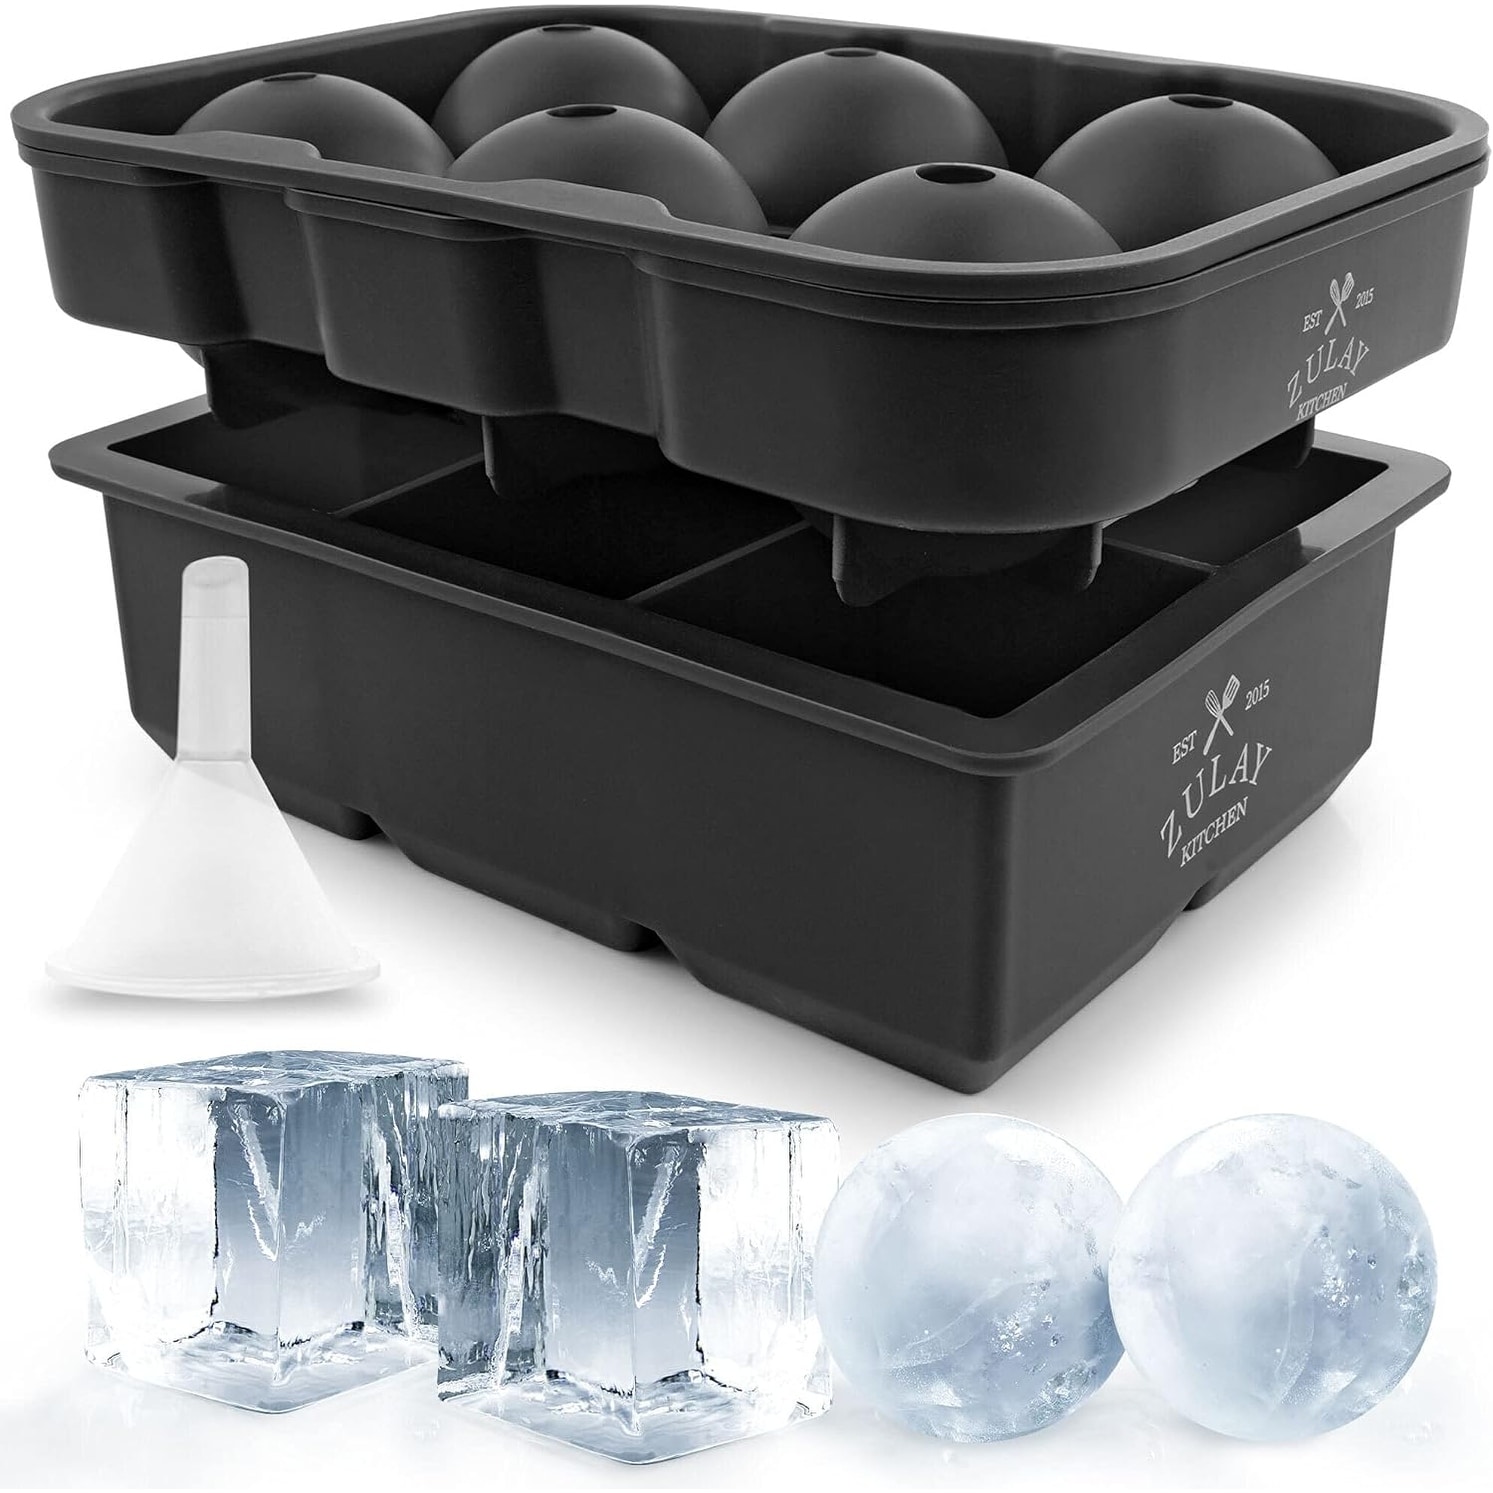 https://ak1.ostkcdn.com/images/products/is/images/direct/18d5c5edfeeb65814204b4f51649b2271c61ebce/Zulay-Kitchen-Silicone-Ice-Cube-Trays-Set-of-2.jpg